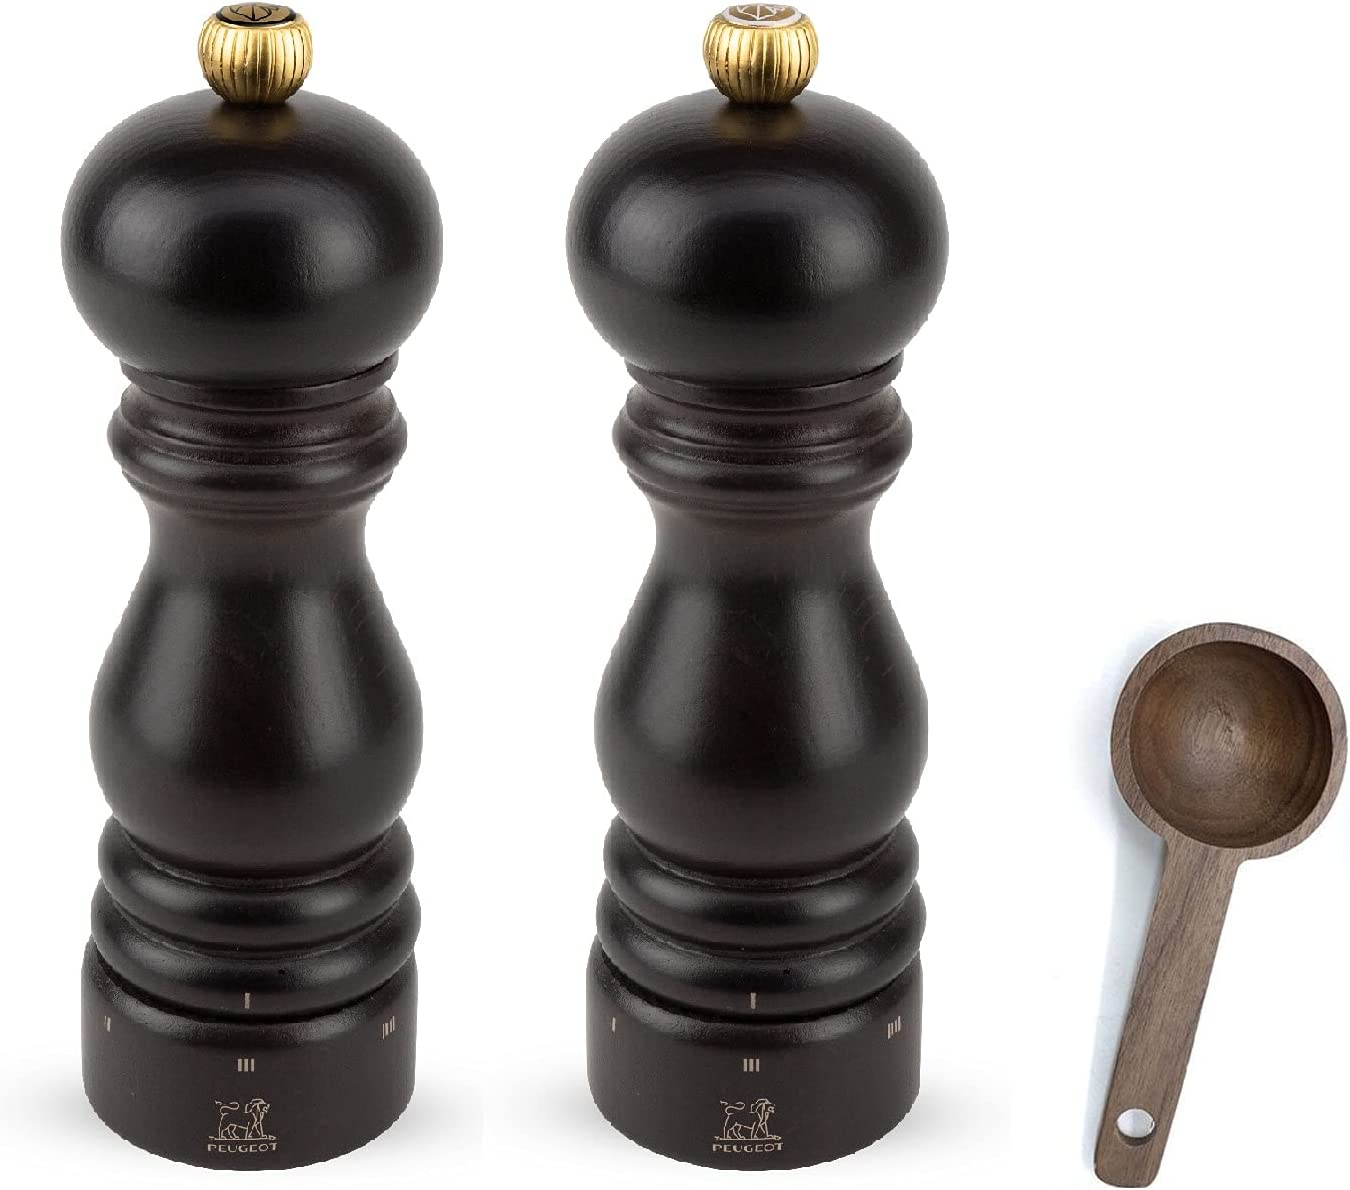 Peugeot Paris u'Select Salt &amp; Pepper Mill Gift Set Chocolate - With Wooden Spice Scoop (7 Inch) parallel imported goods 